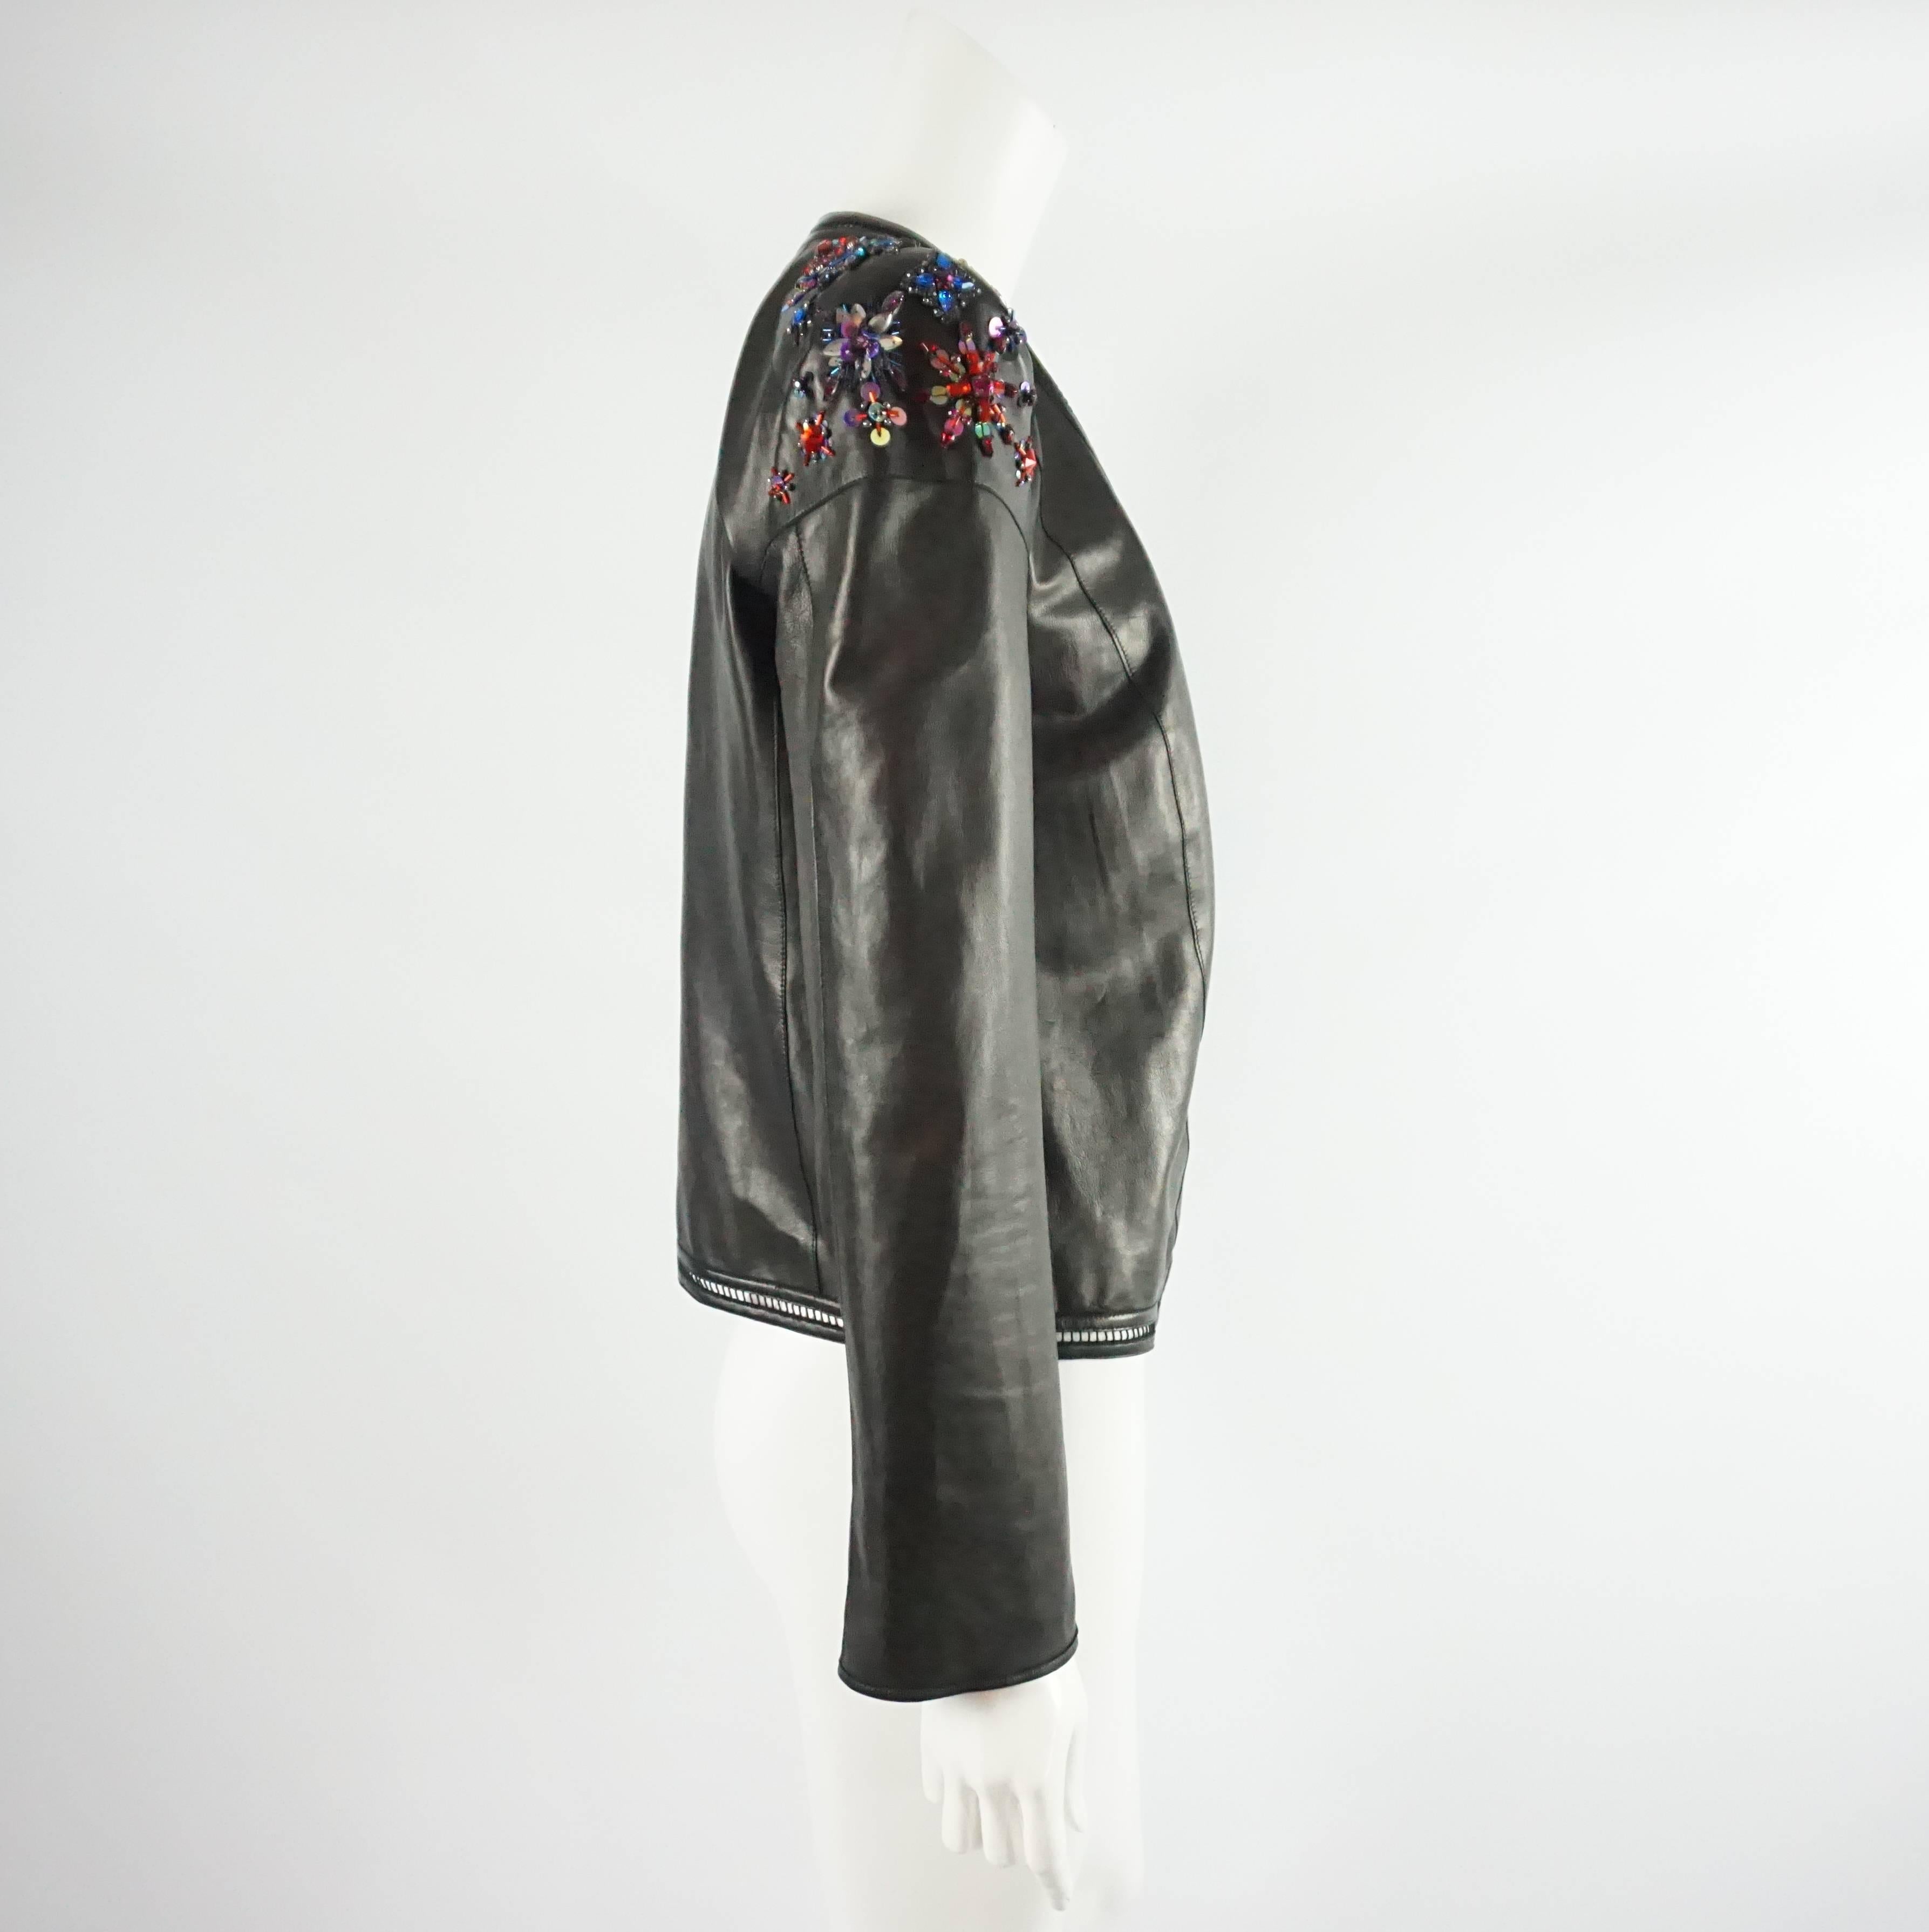 Roberto Cavalli black leather Stone/Bead/Paillette - Size 44. This jacket has one small closure in the front, is fully lined, has a perforated leather detail trim.  On both shoulders there are multi-colored rhinestone and sequin detailing. This